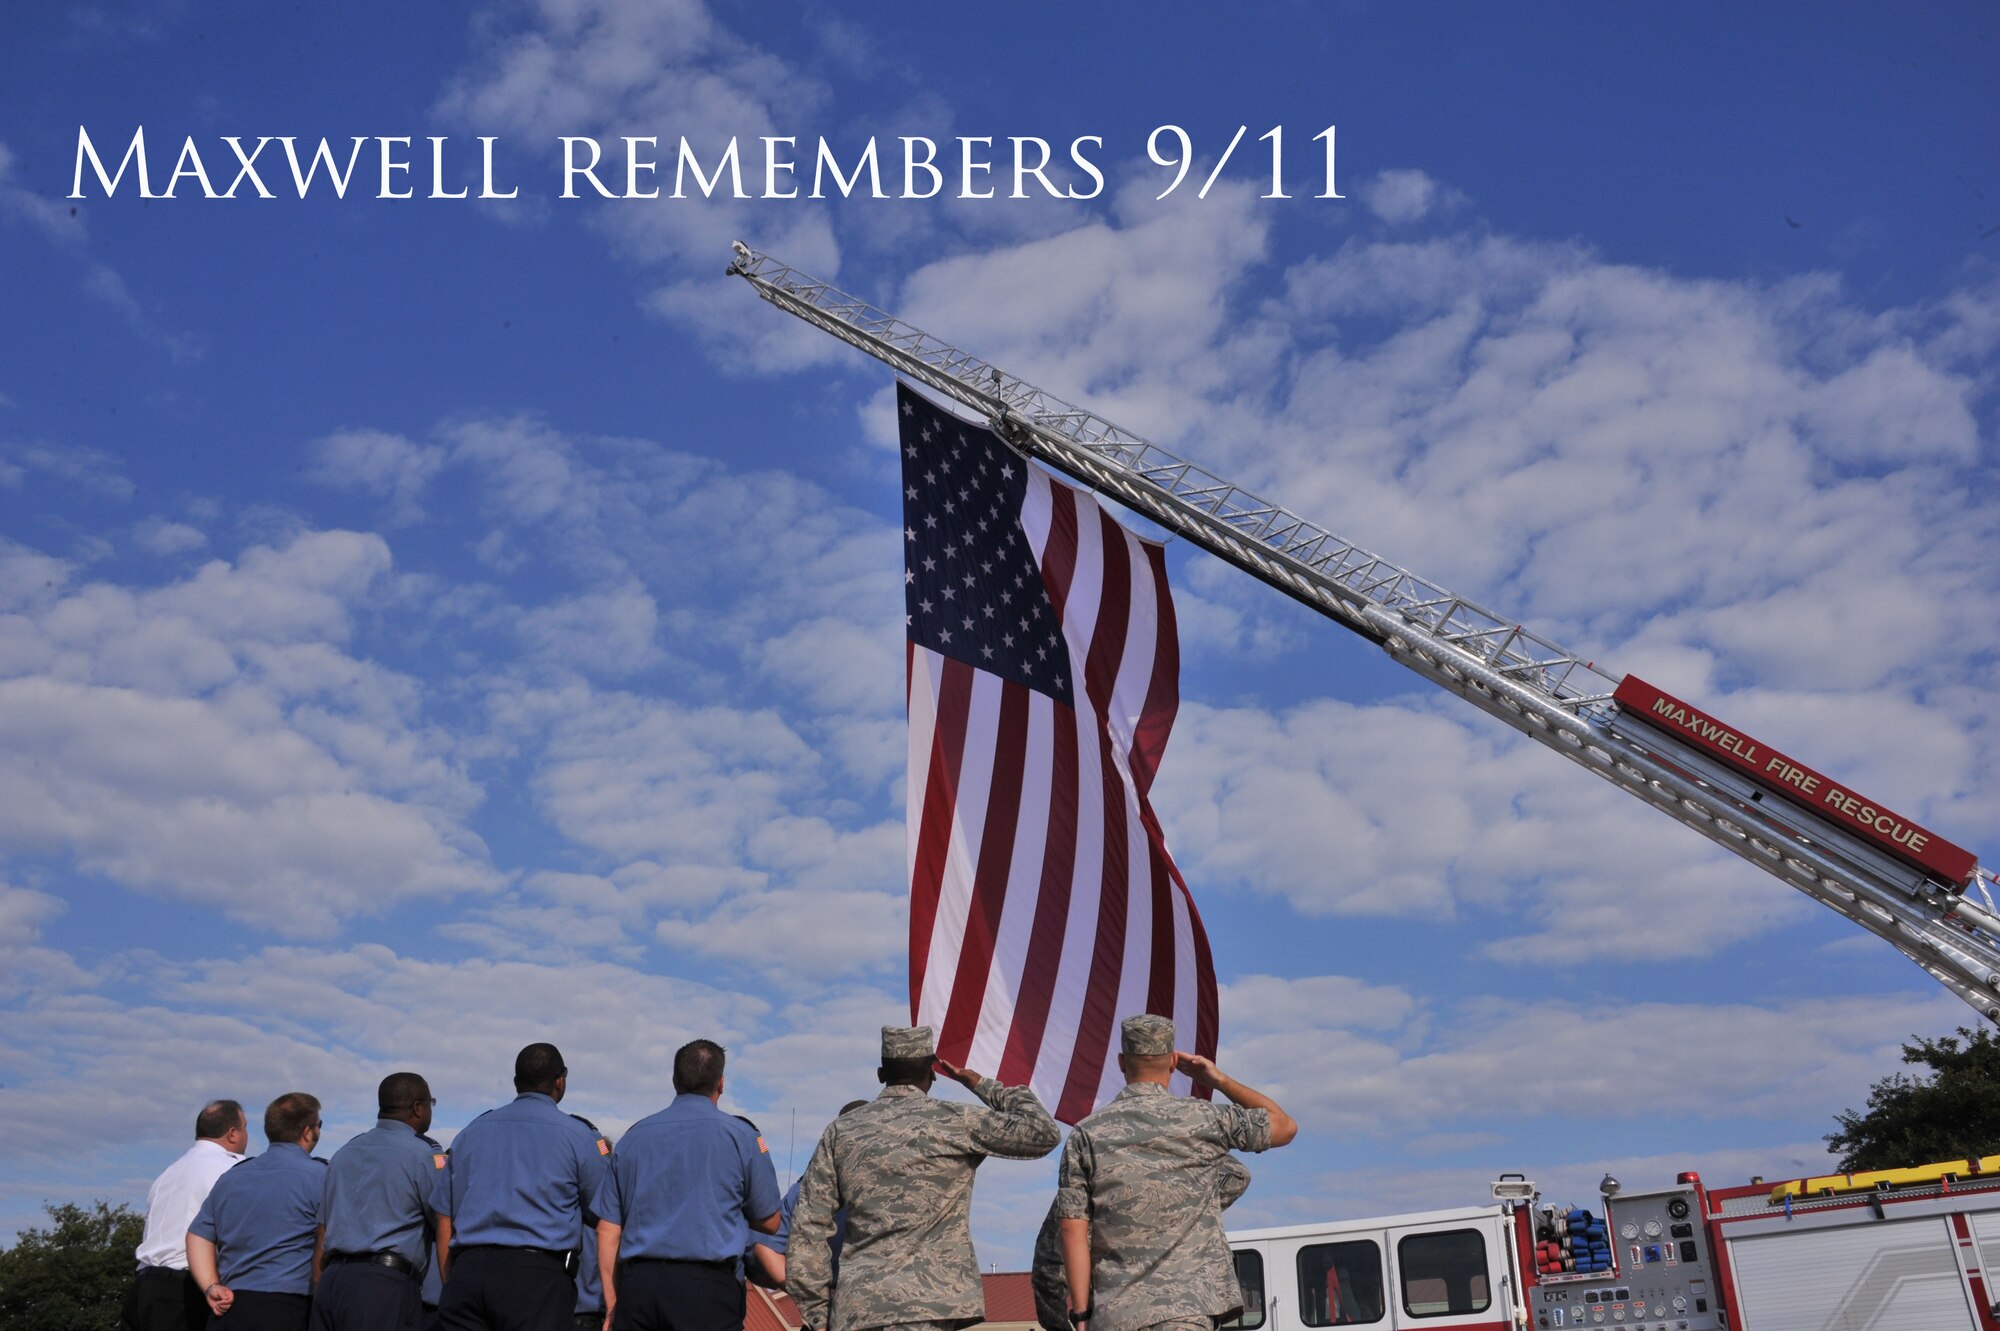 Member of the Maxwell Air Force Base Fire Department remember those who died 11 years ago in the Sept. 11, 2001 tragedy as they fly the American flag at half- staff, Sept. 11. Both civilian and military firefighters paused their day to hold a moment of silence and a prayer on the anniversary of the attack on America. (U.S. Air Force photo by Airman 1st Class William Blankenship)